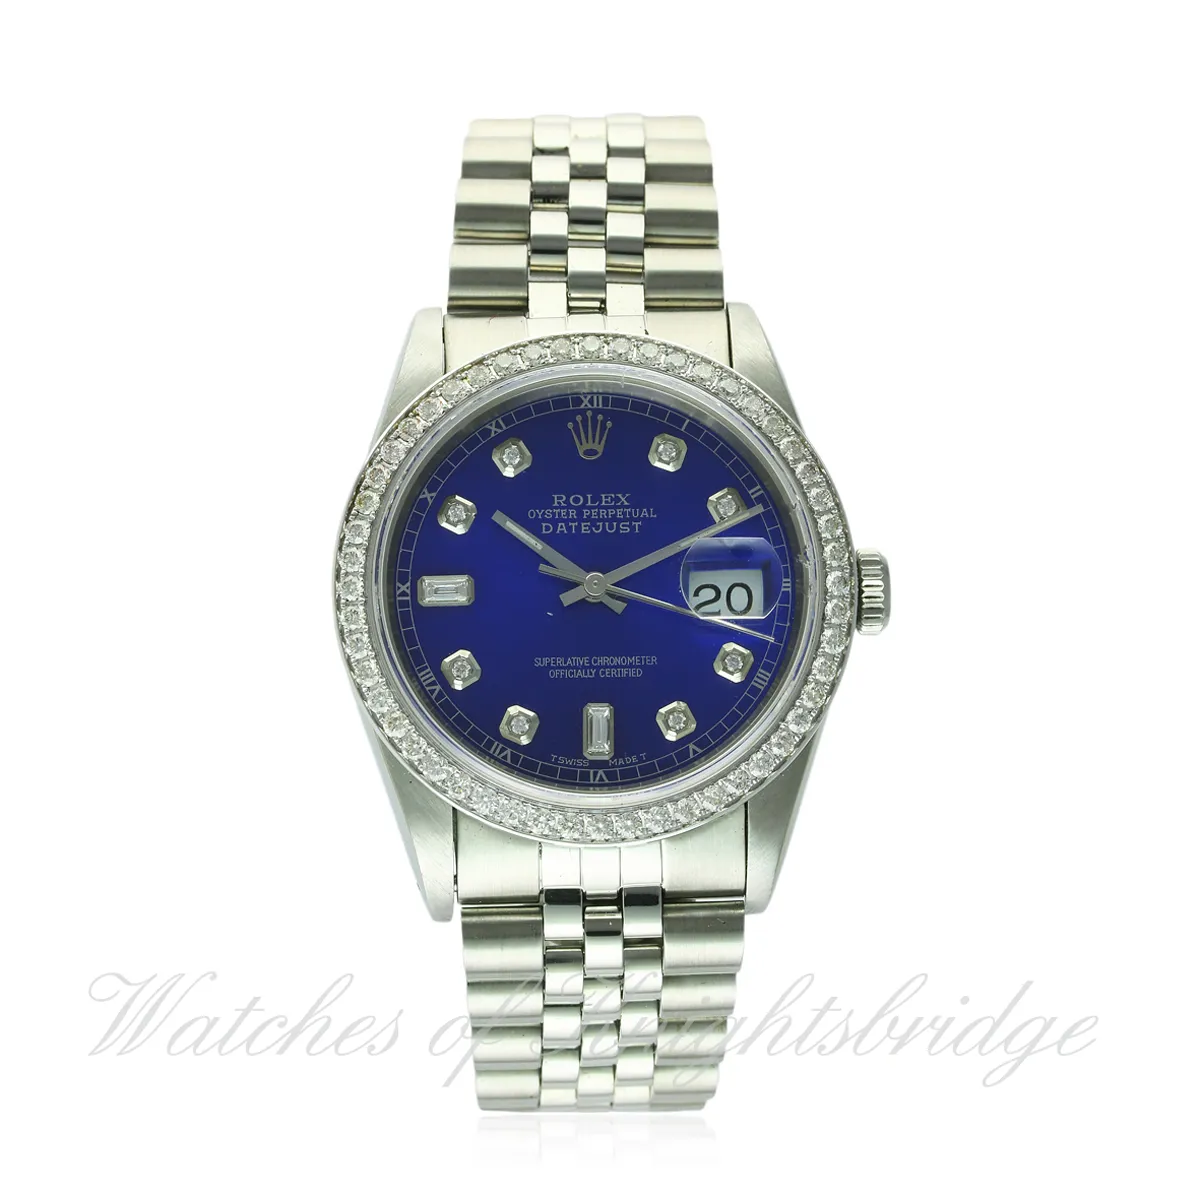 Rolex Datejust 36 16220 36mm Stainless steel and diamond Blue